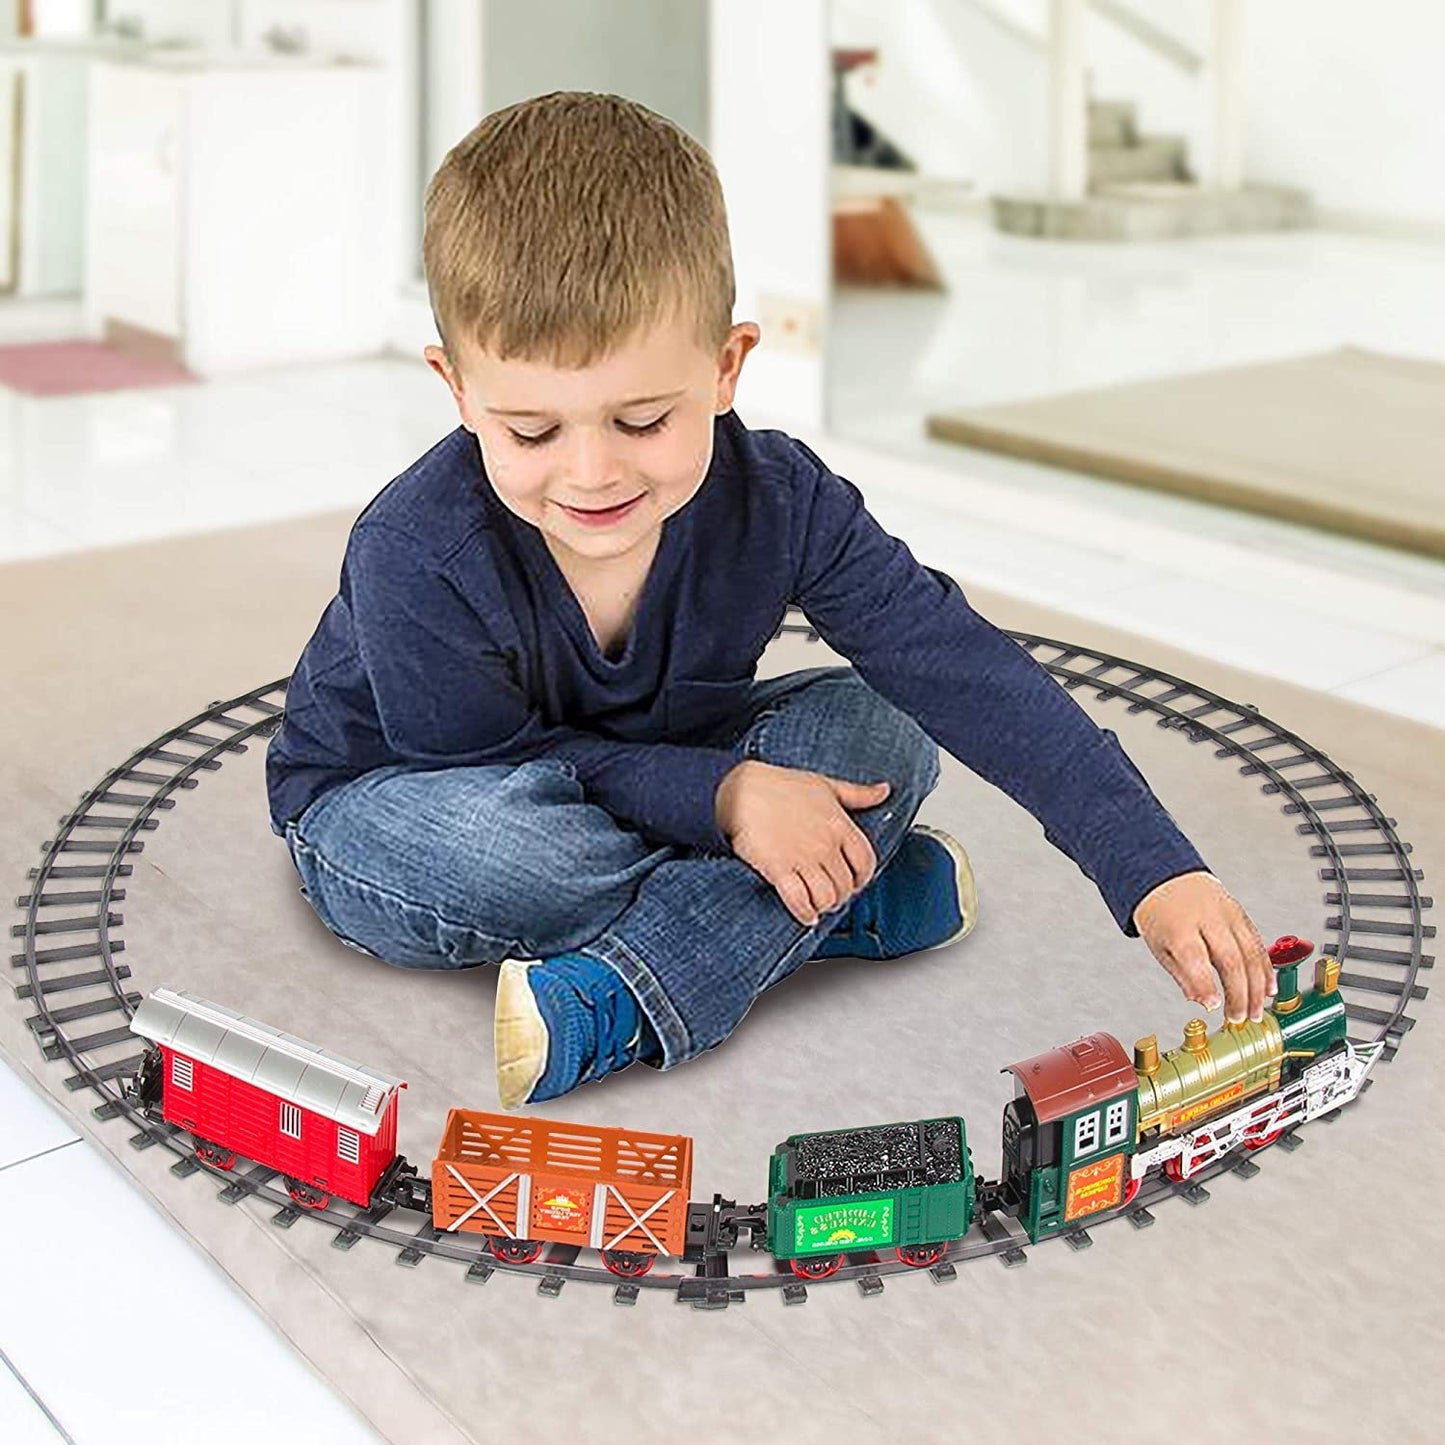 ArtCreativity Deluxe Train Set for Kids - Battery-Operated Toy with 4 Cars and Tracks - Durable Plastic - Cute Christmas Holiday Train for Under The Tree, Great Gift Idea for Boys, Girls, Toddlers